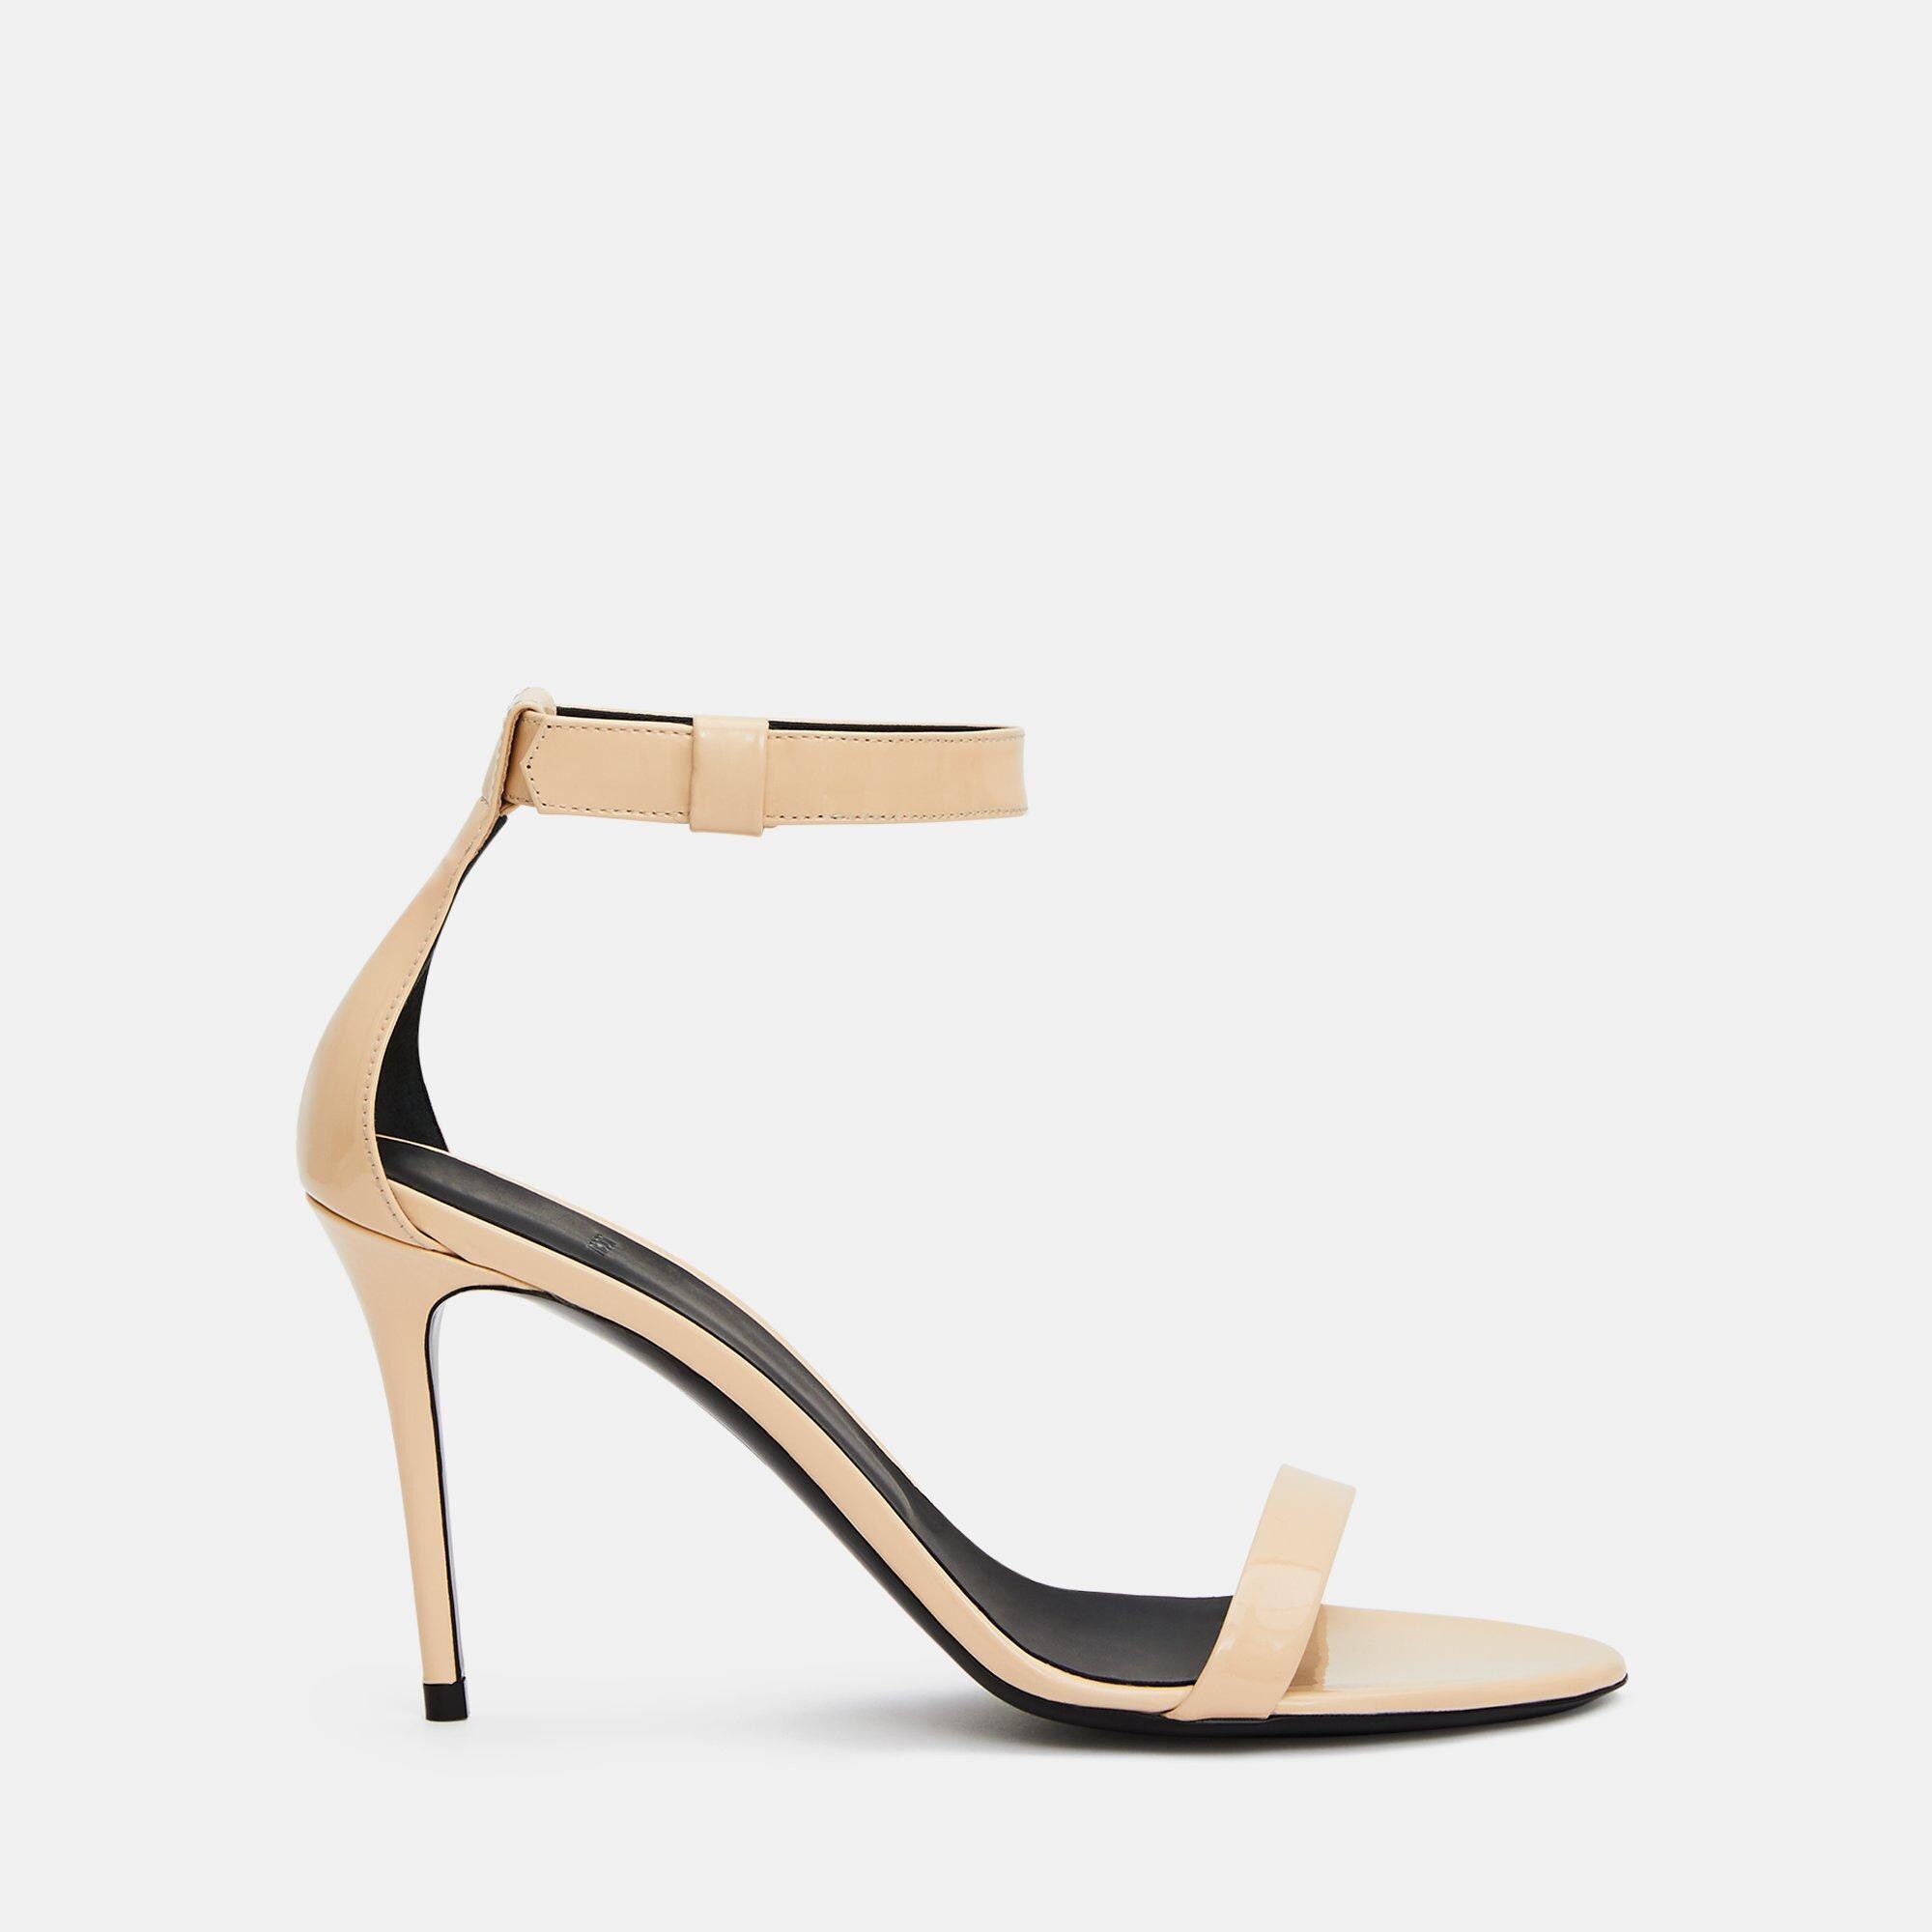 Theory High Heel Sandal in Patent Leather